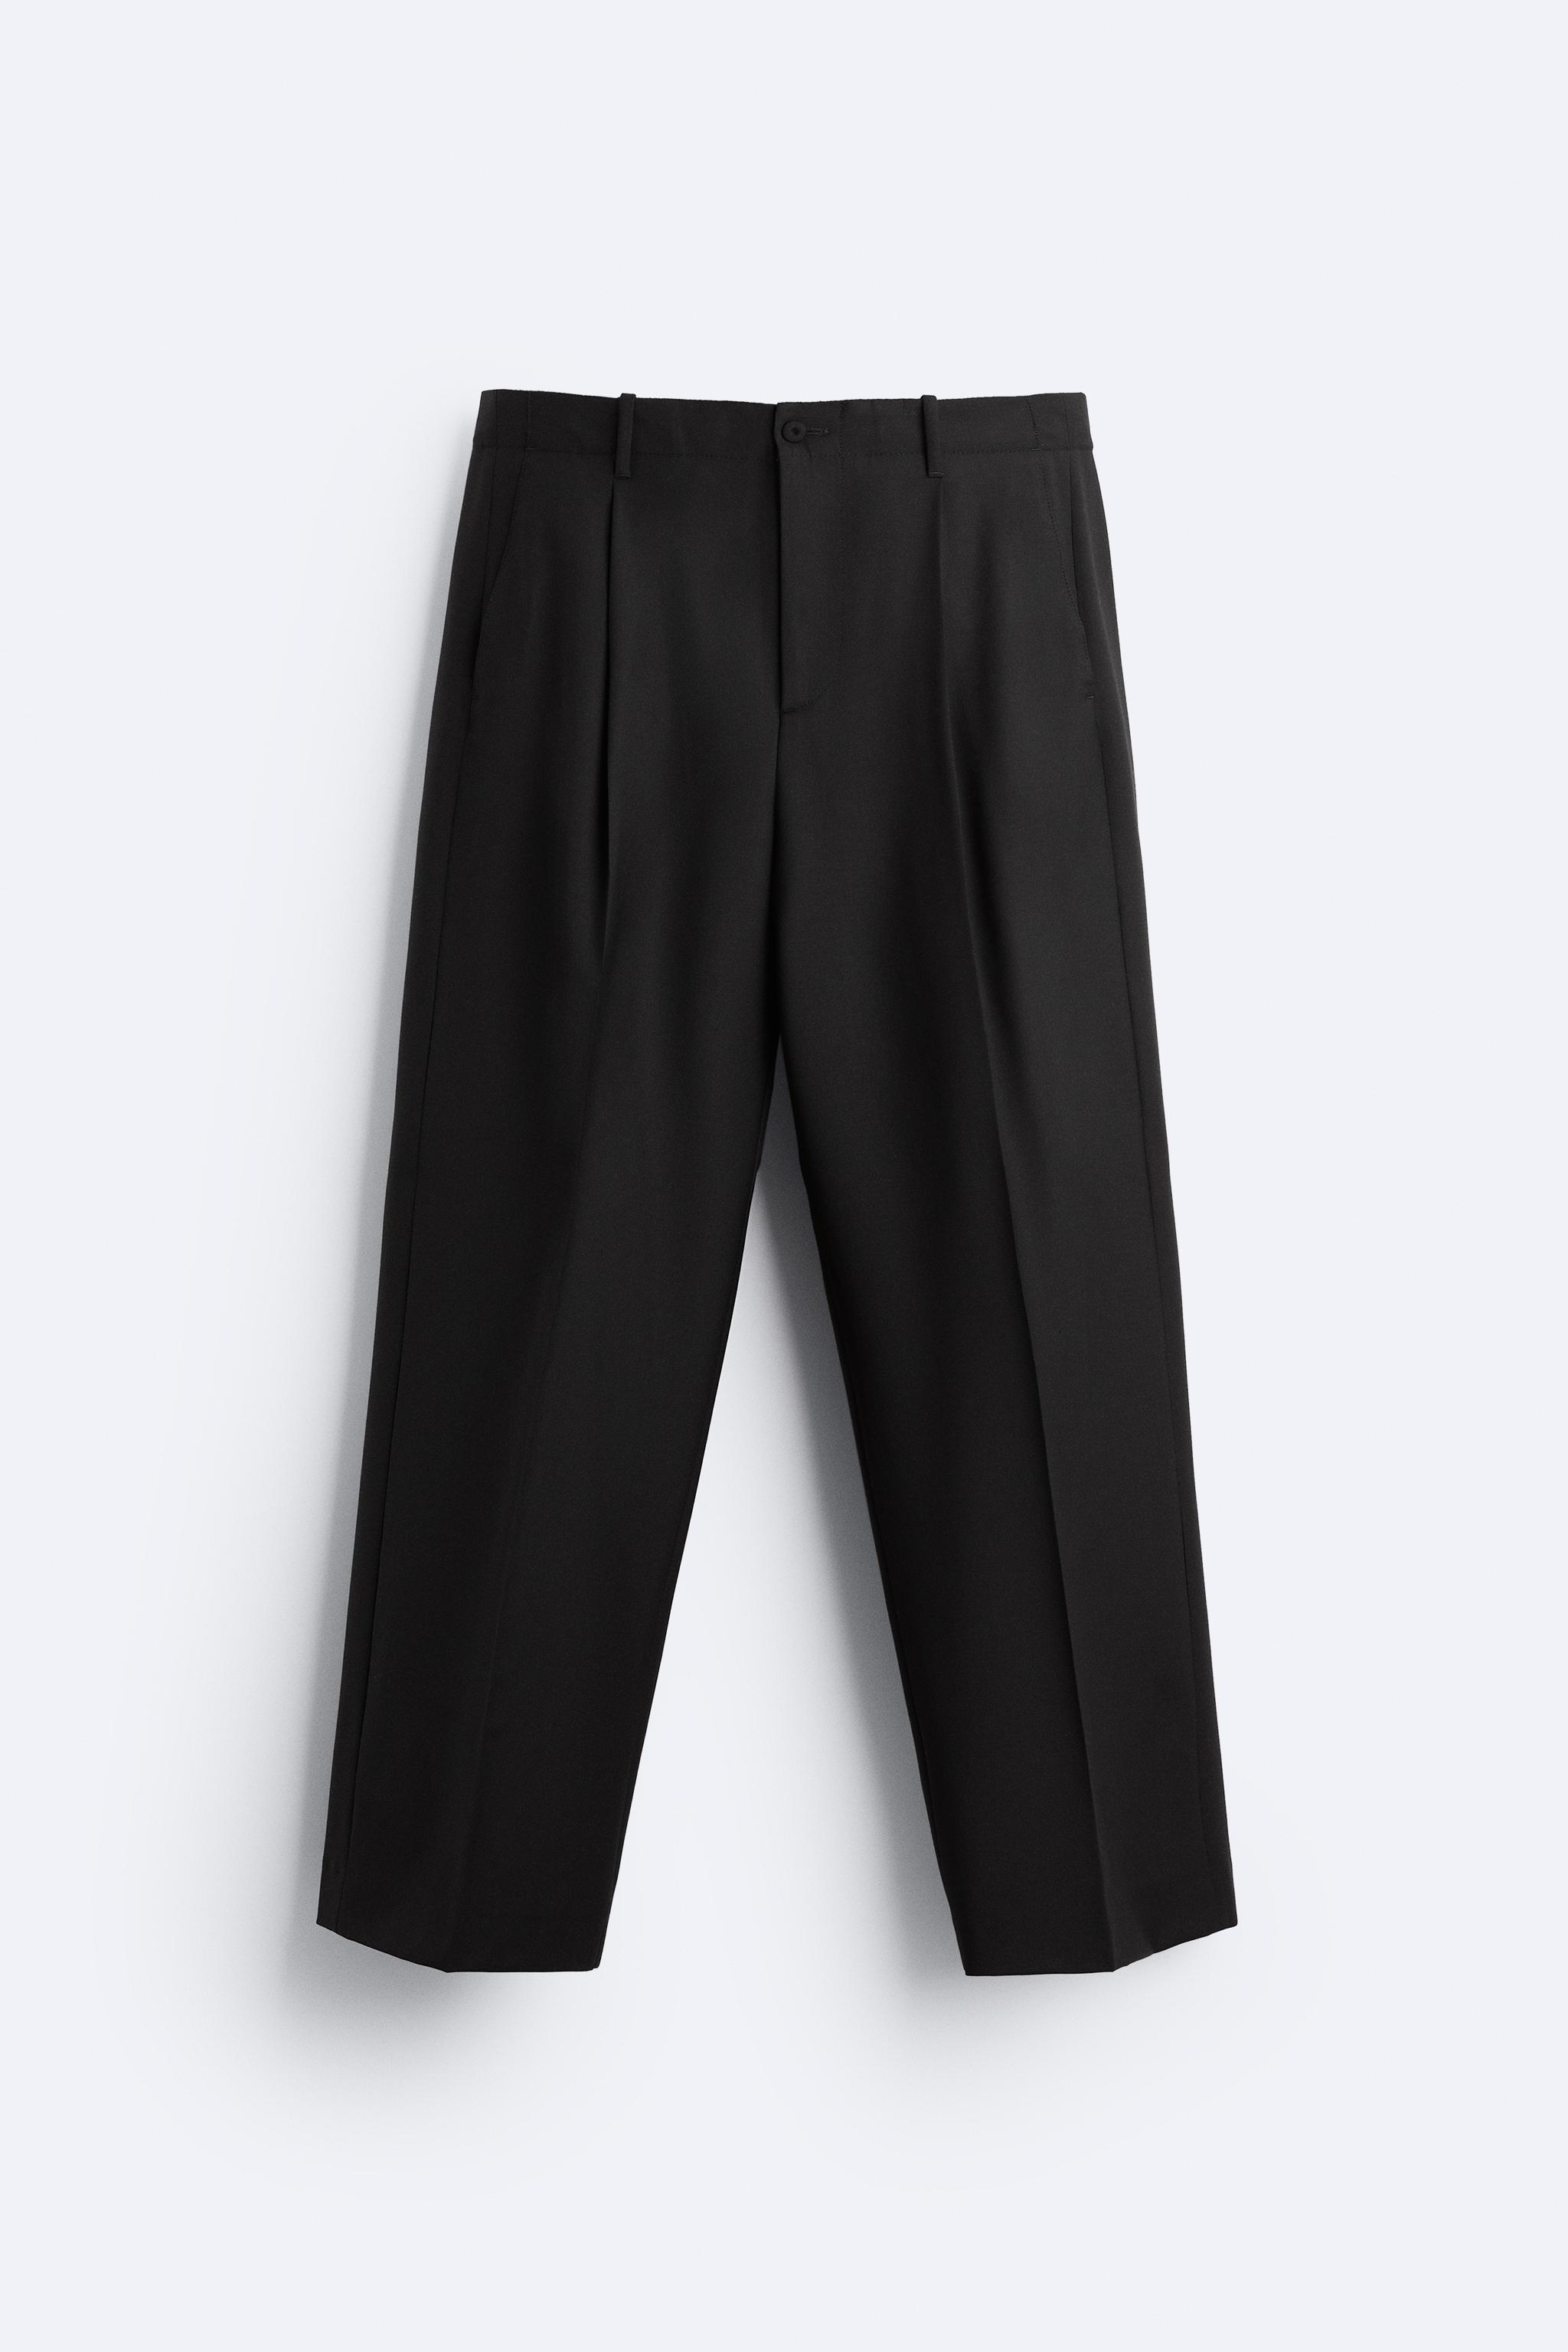 Pleated Pants: Zara Limited Edition Oversized Wool Blend Pants